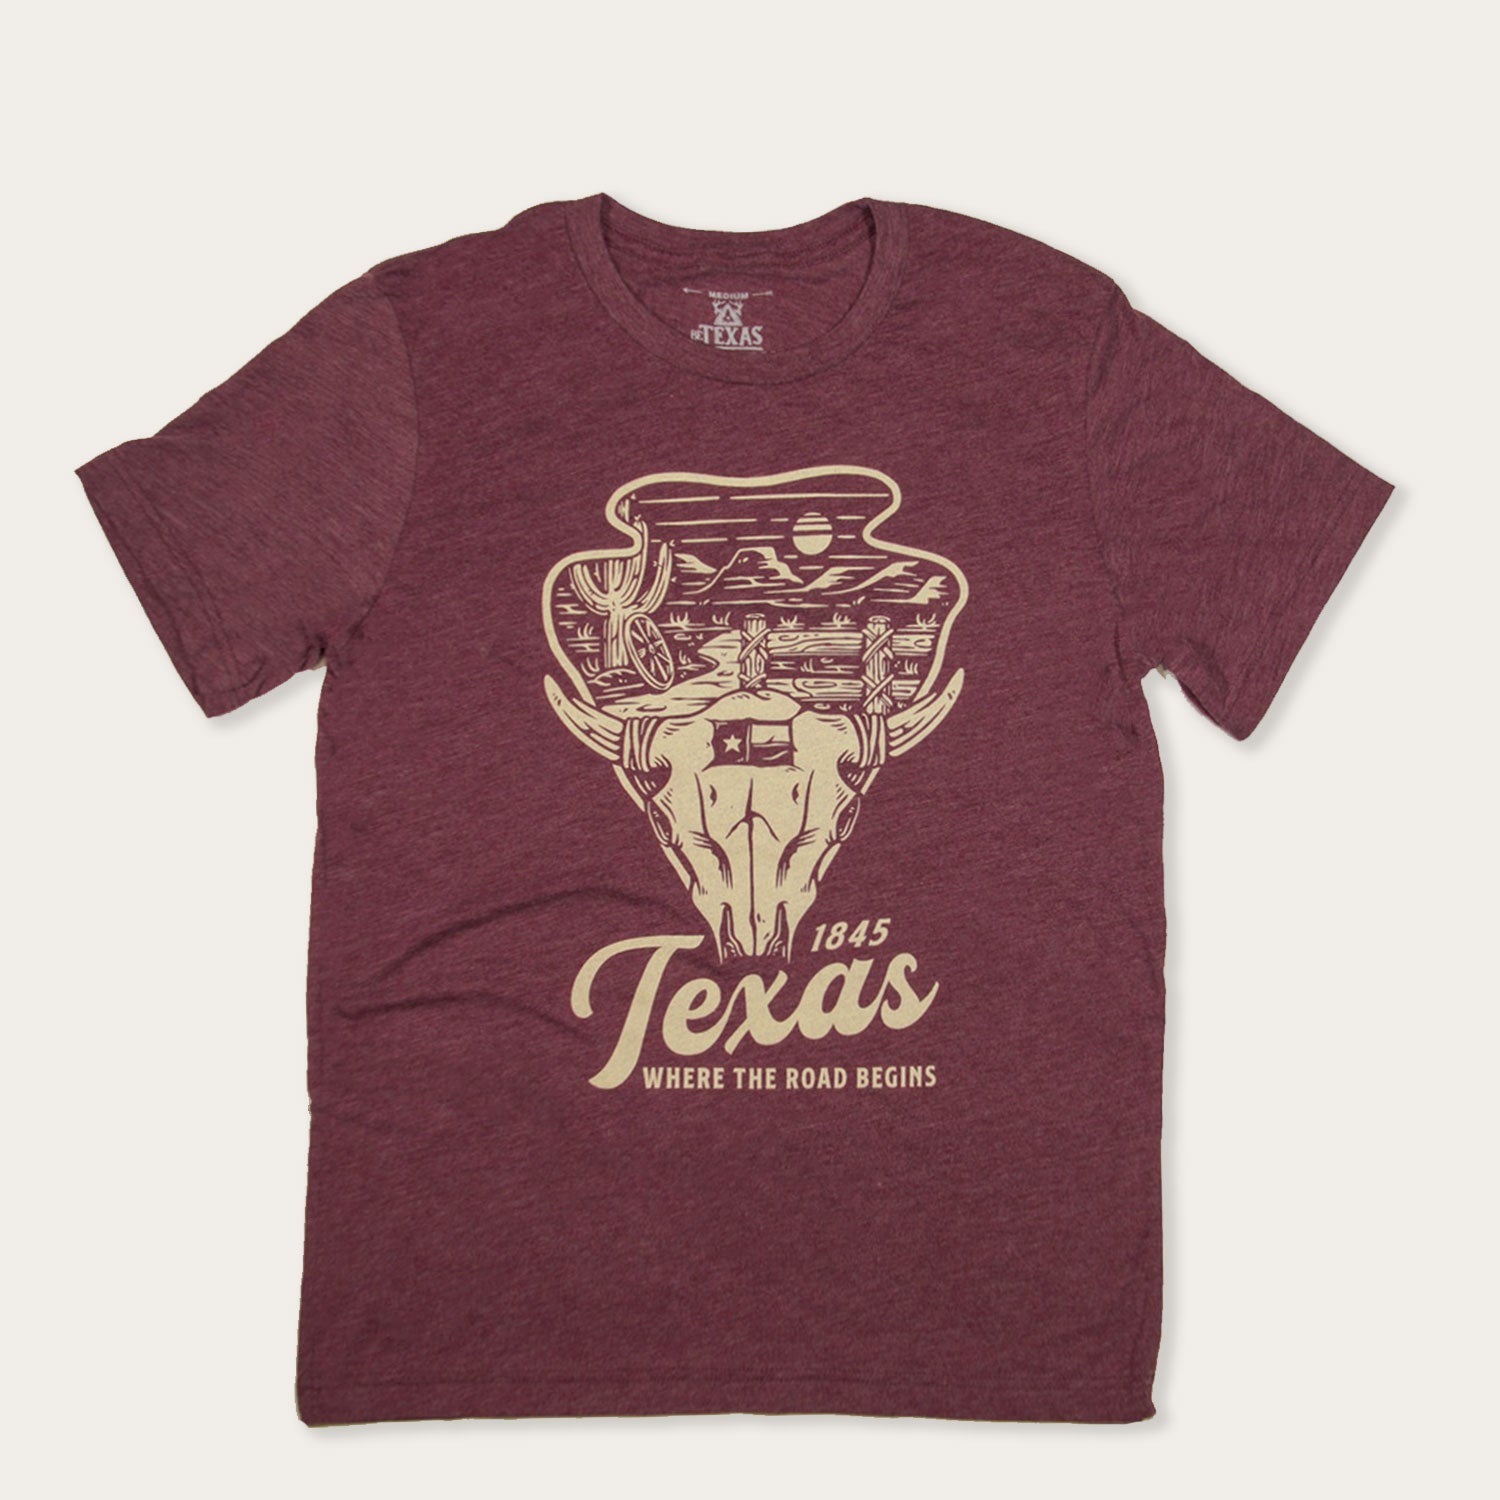 Where The Road Begins Maroon Unisex T-Shirt